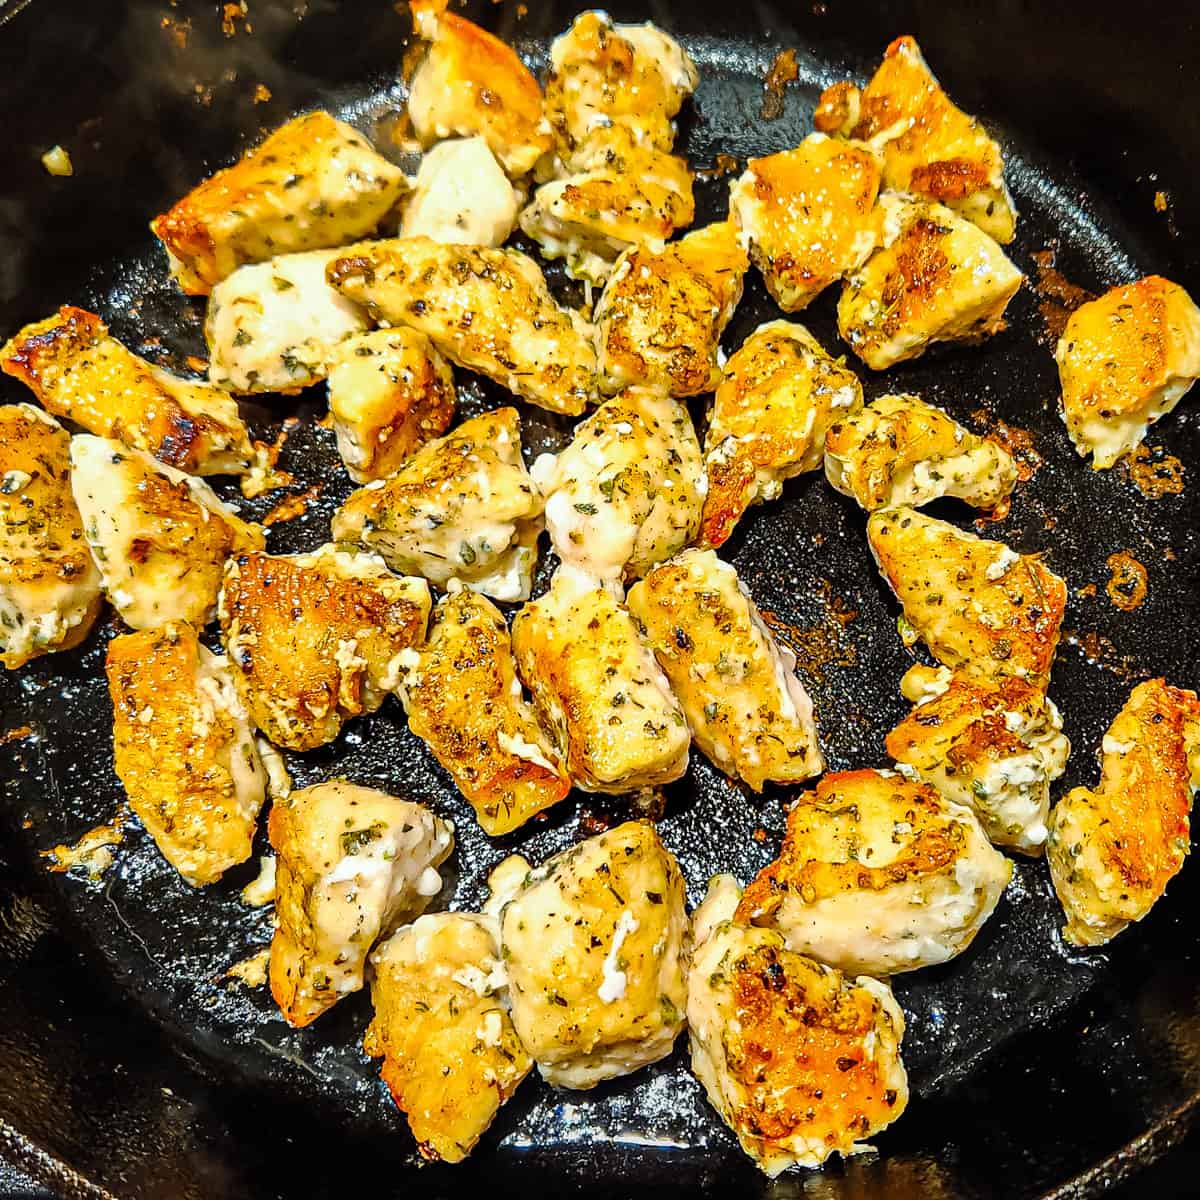 Chunks of chicken being cooked in a large skillet.